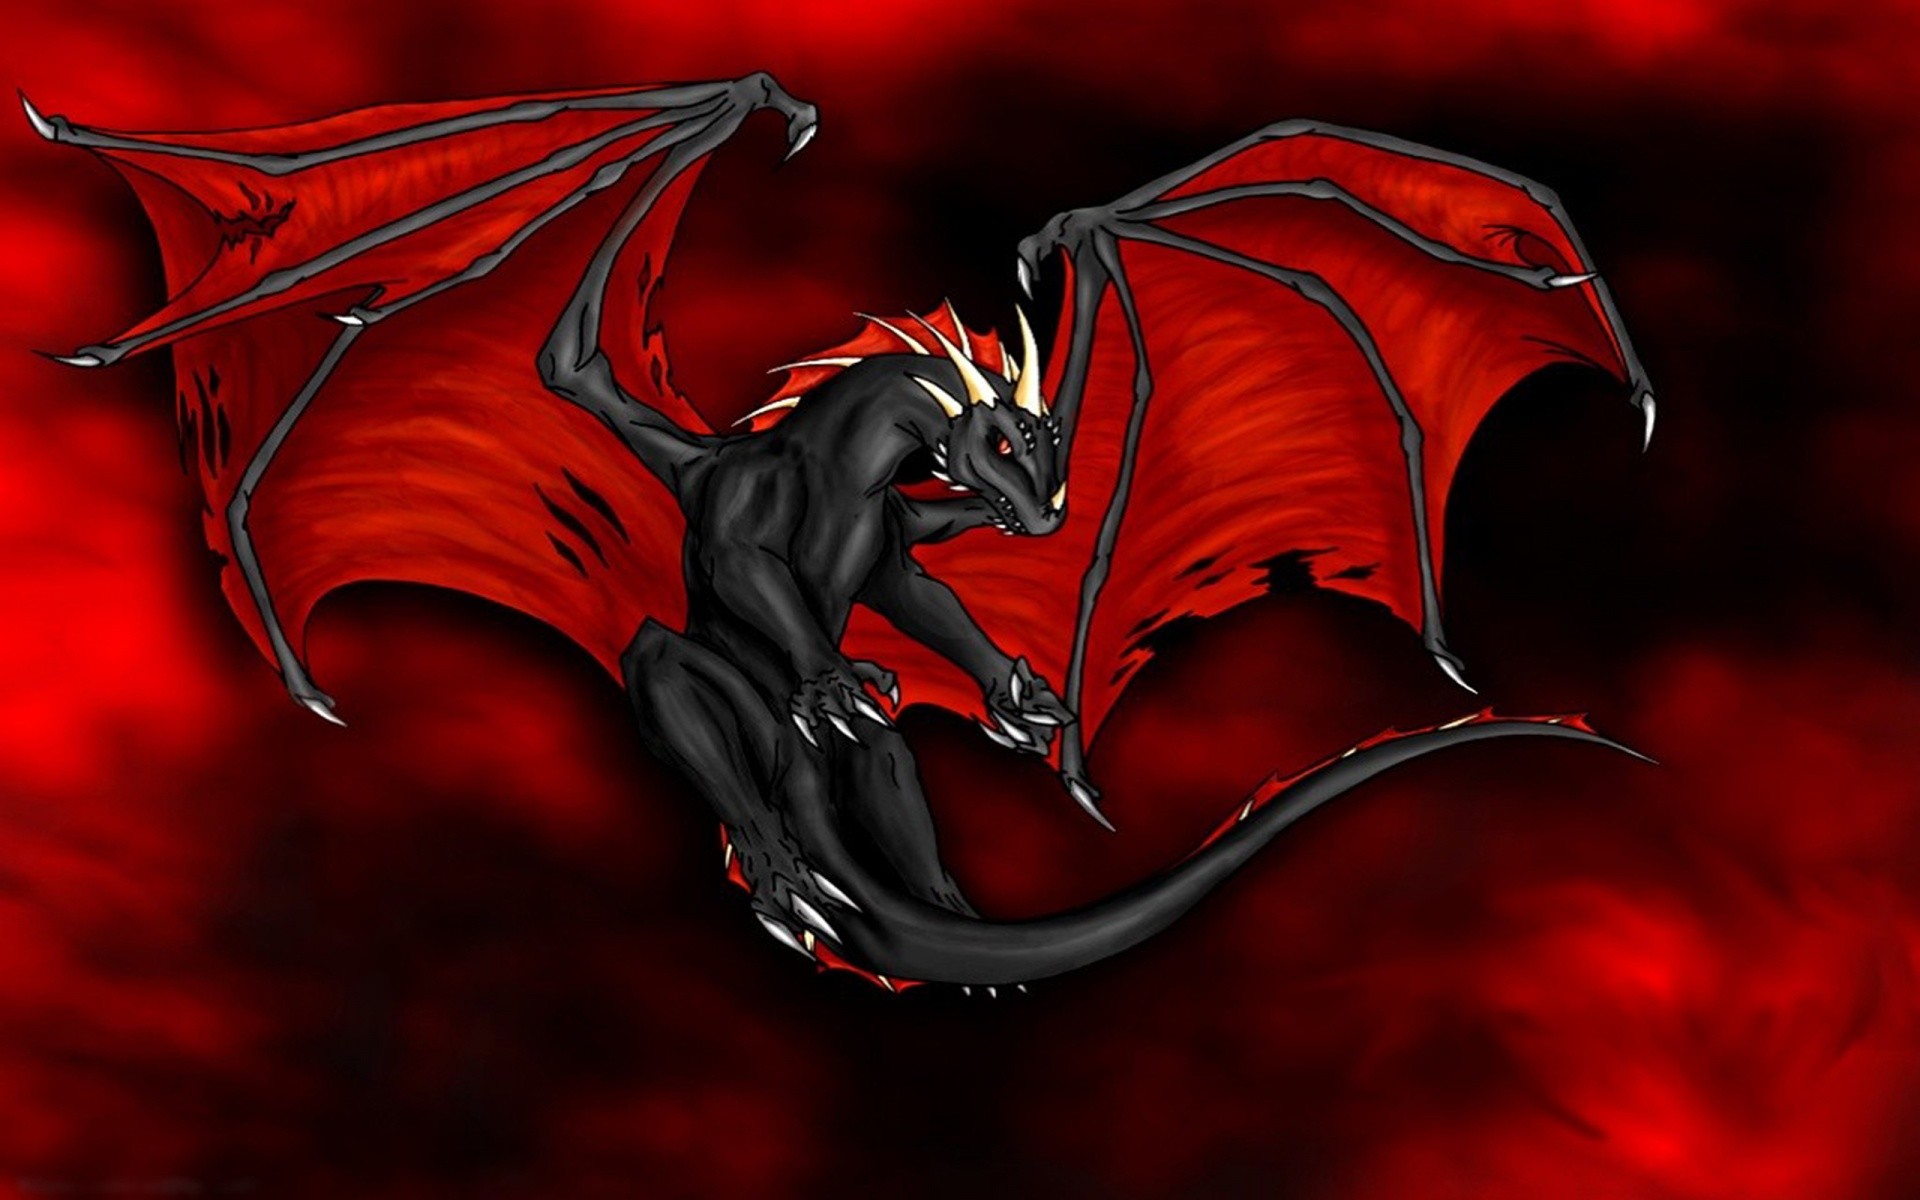 1920x1200 Red Dragon wallpapers and stock photos